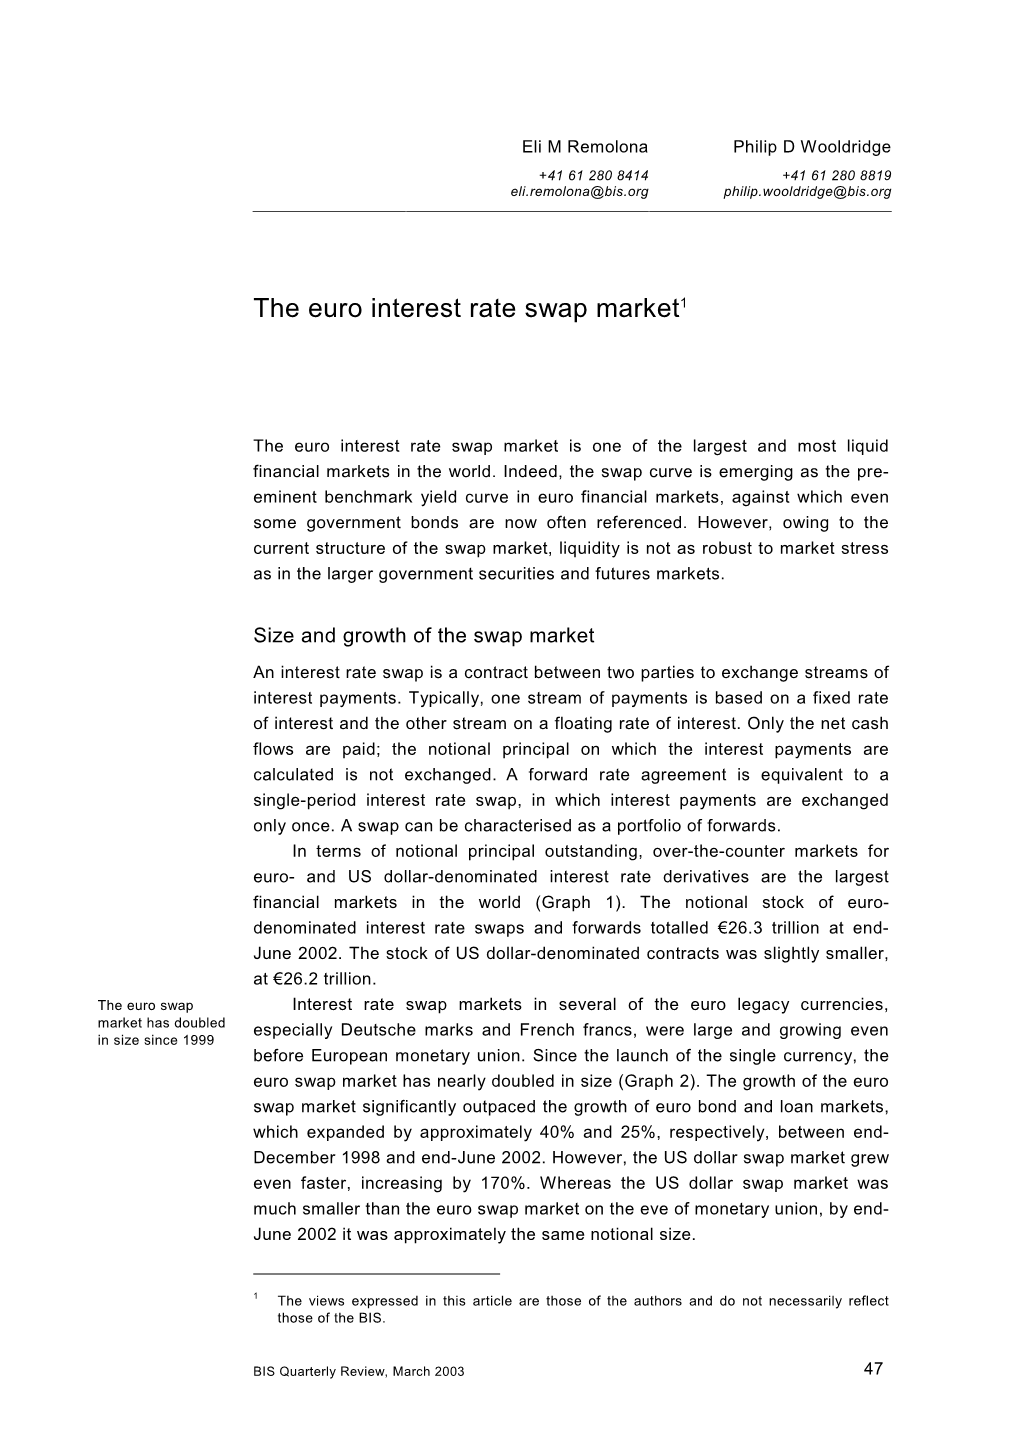 The Euro Interest Rate Swap Market1